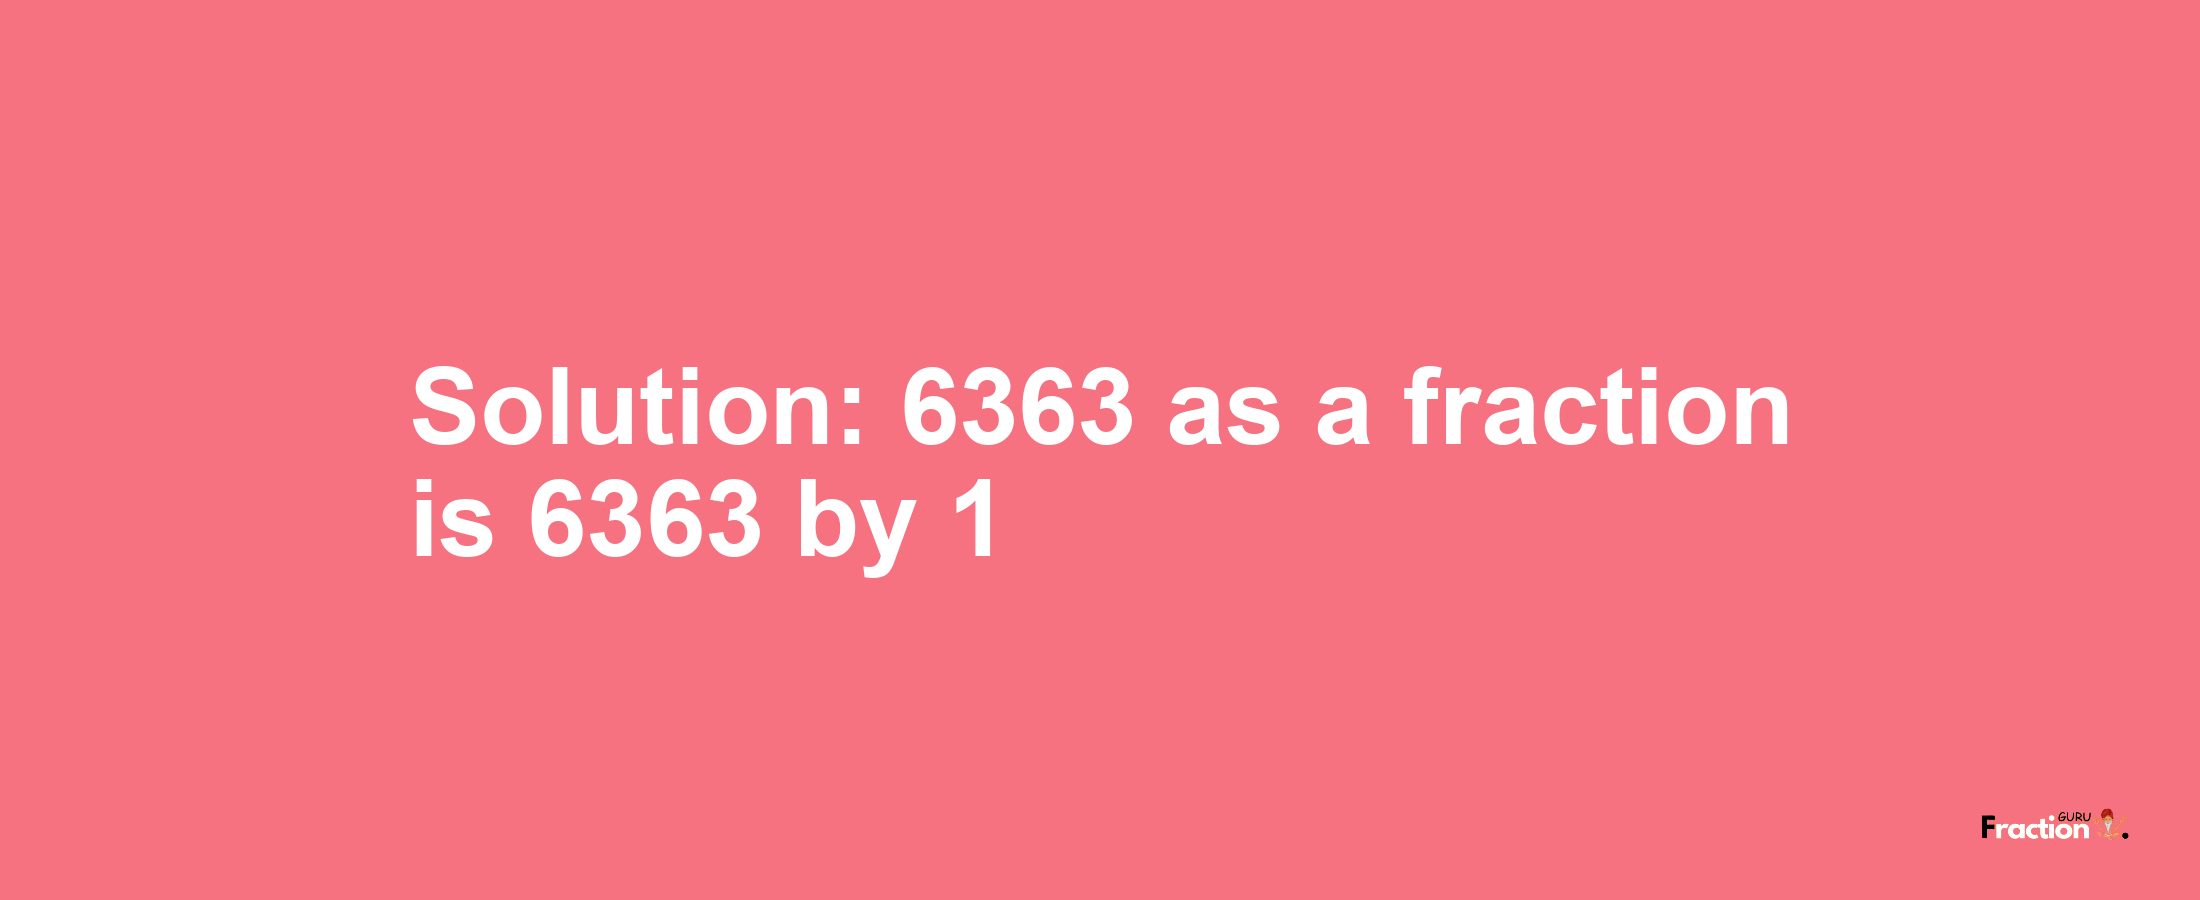 Solution:6363 as a fraction is 6363/1